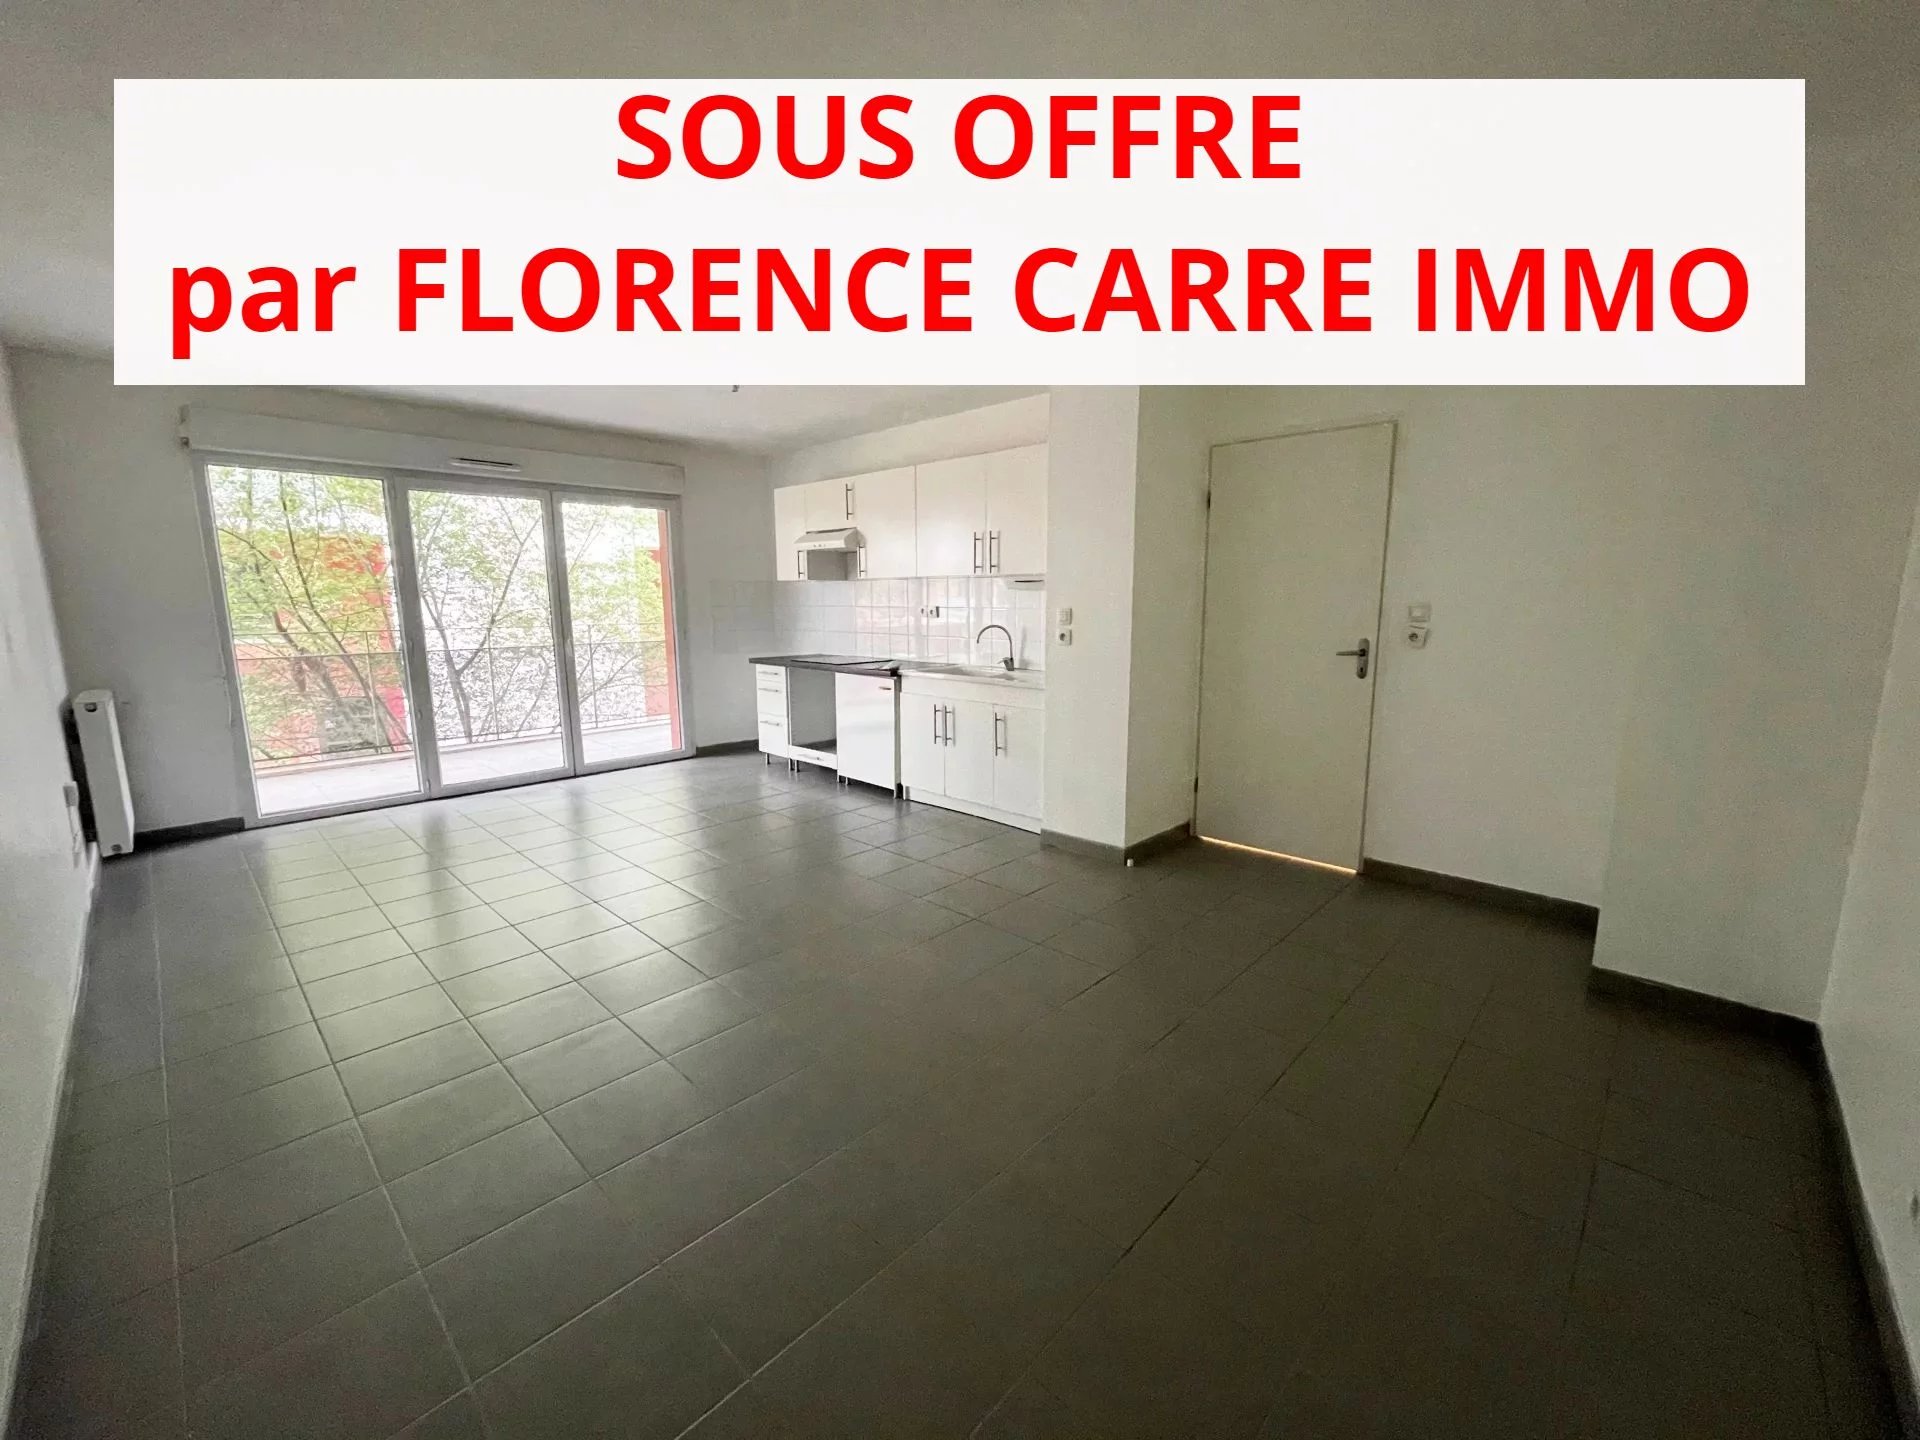 Appartement T3 - 64m² - 31400 TOULOUSE